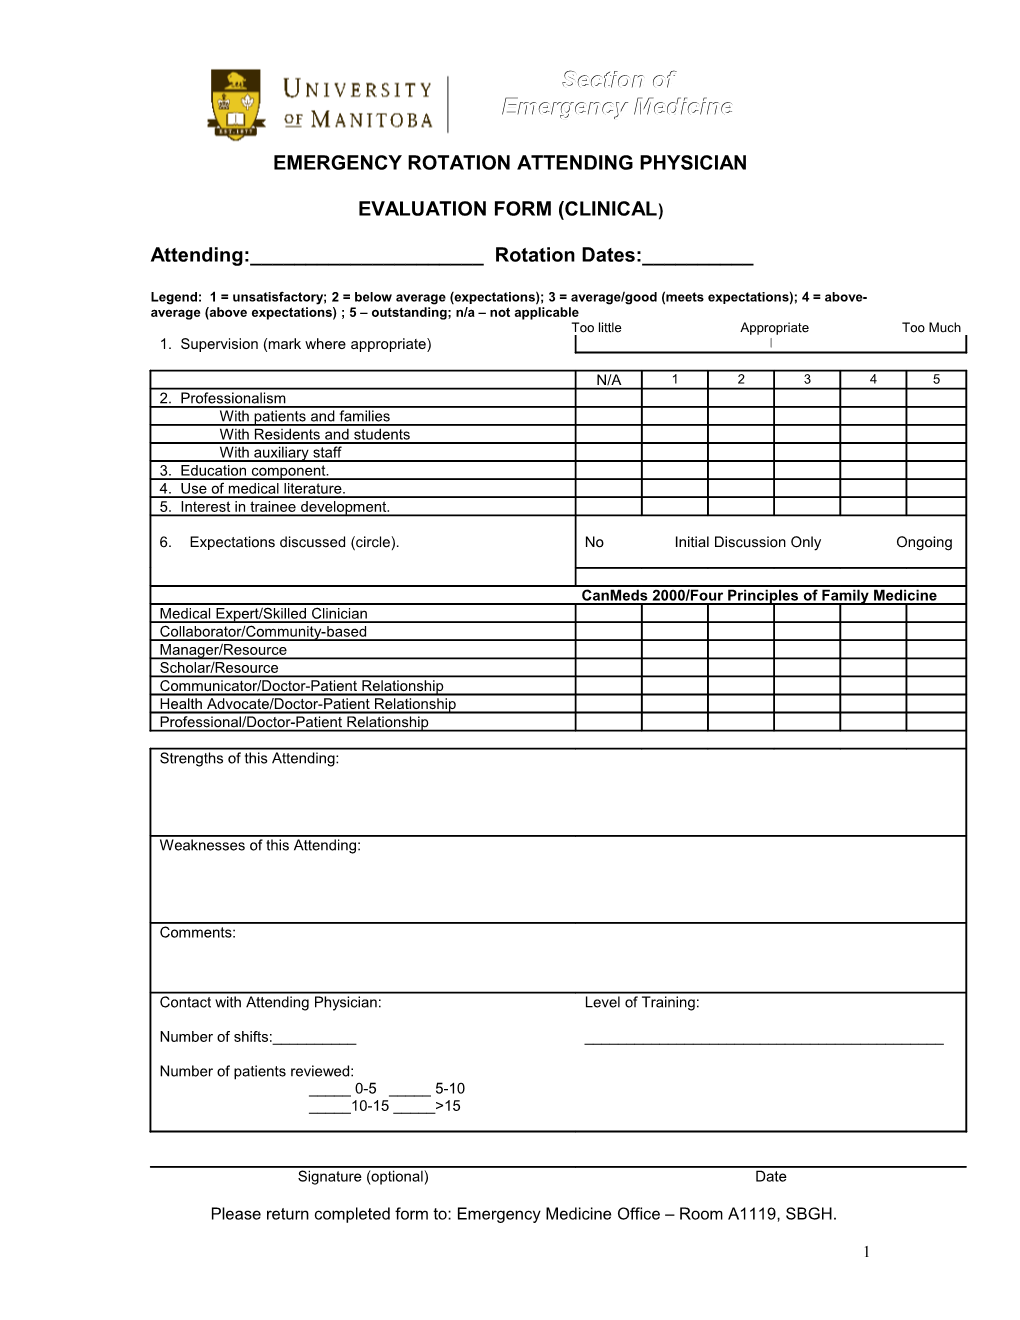 Emergency Rotation Attending Evaluation Form